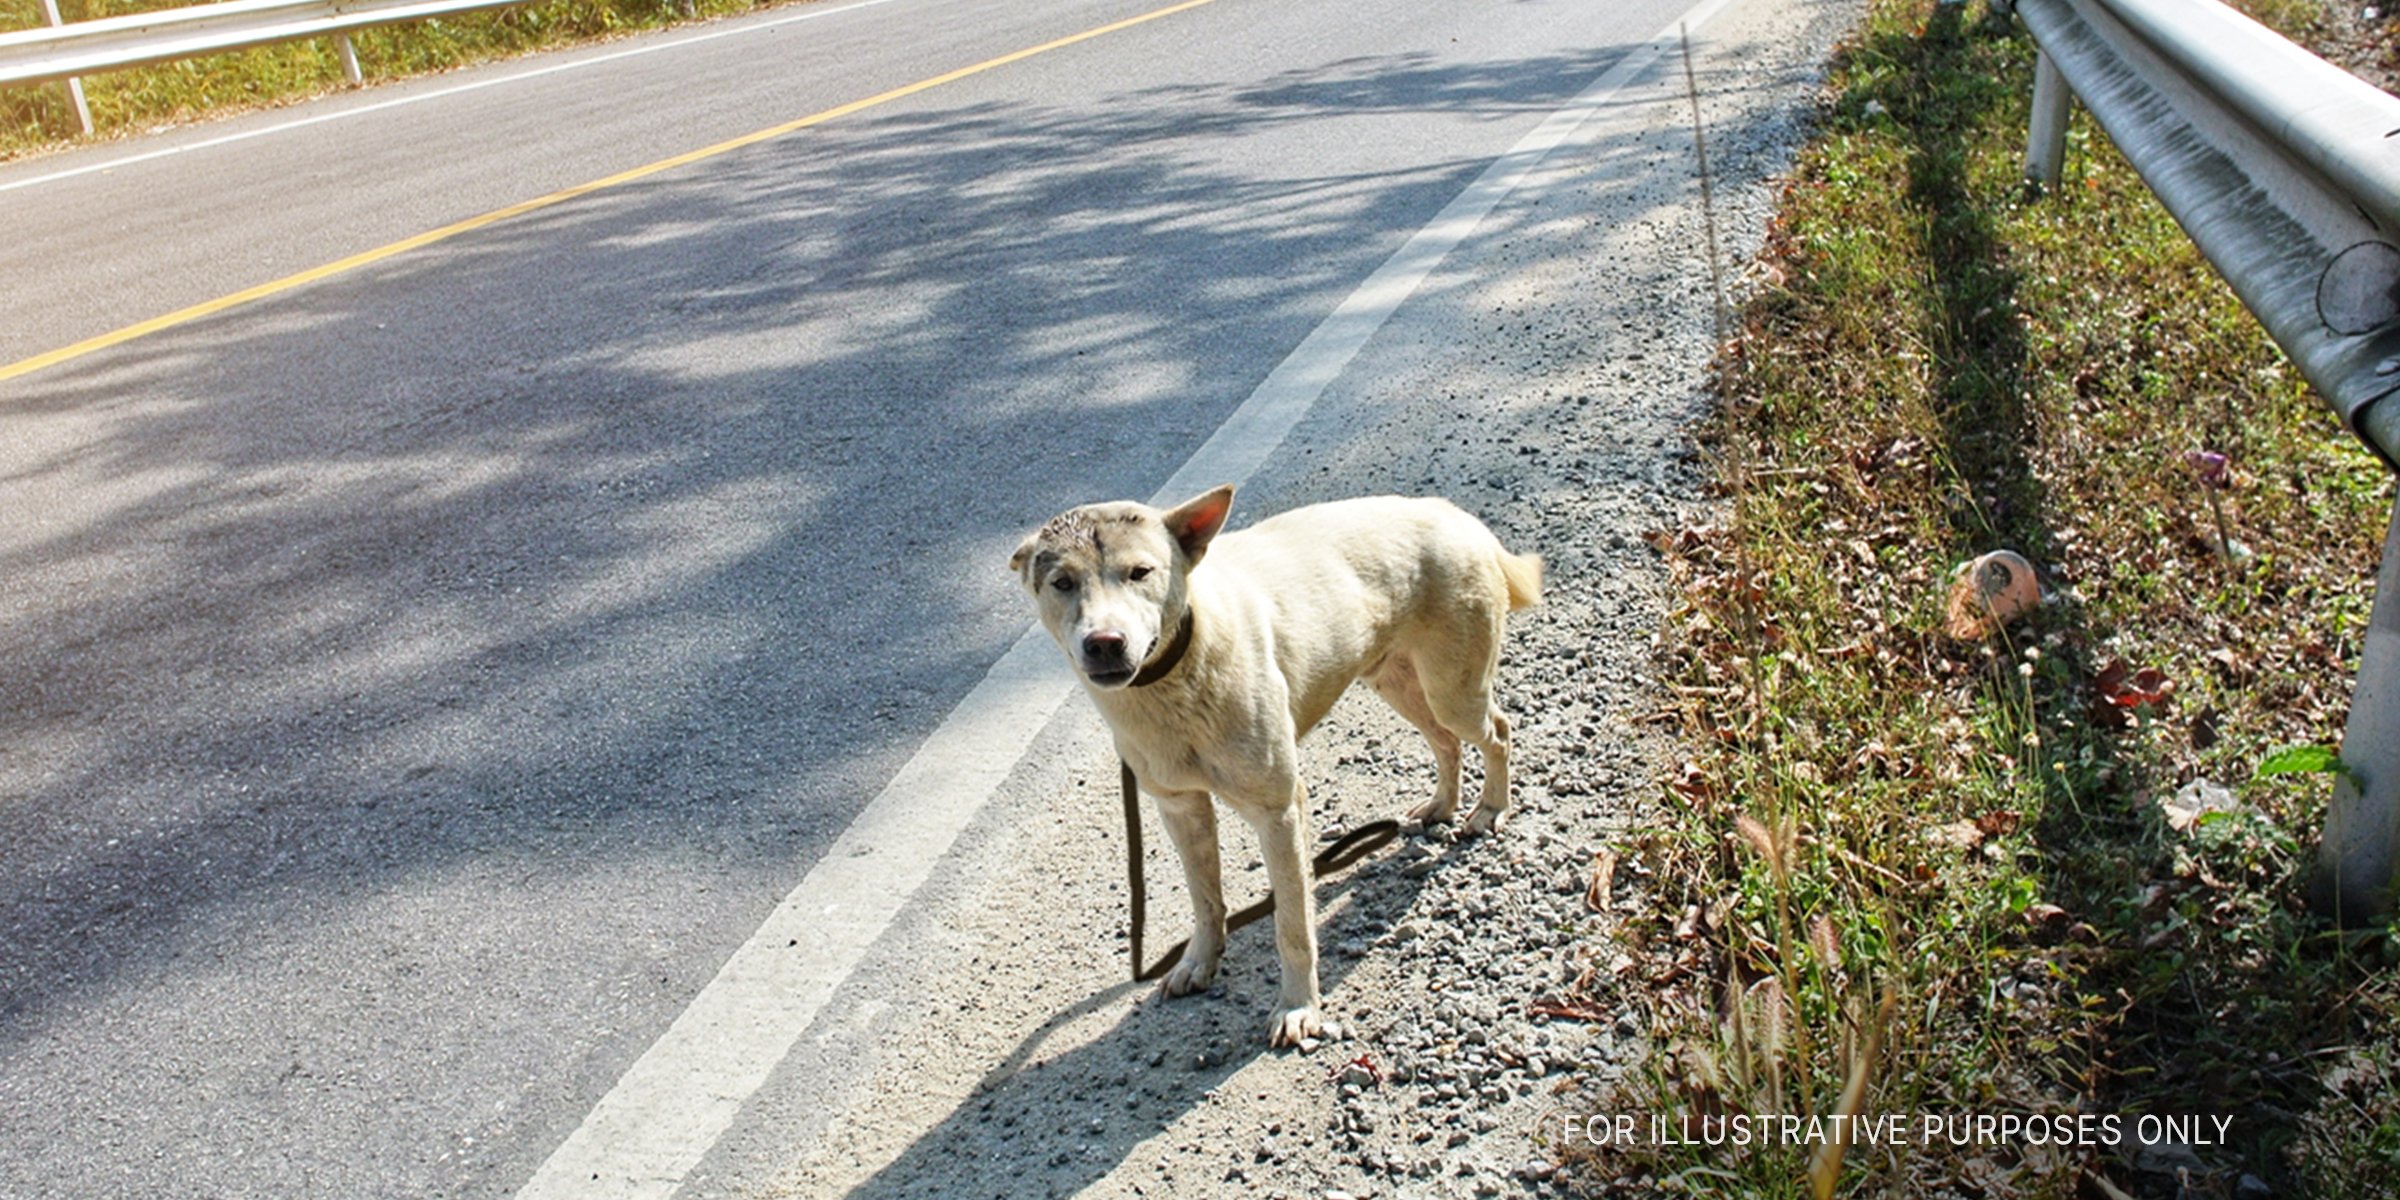 Dog Stranded On A Road. | Source: Shutterstock